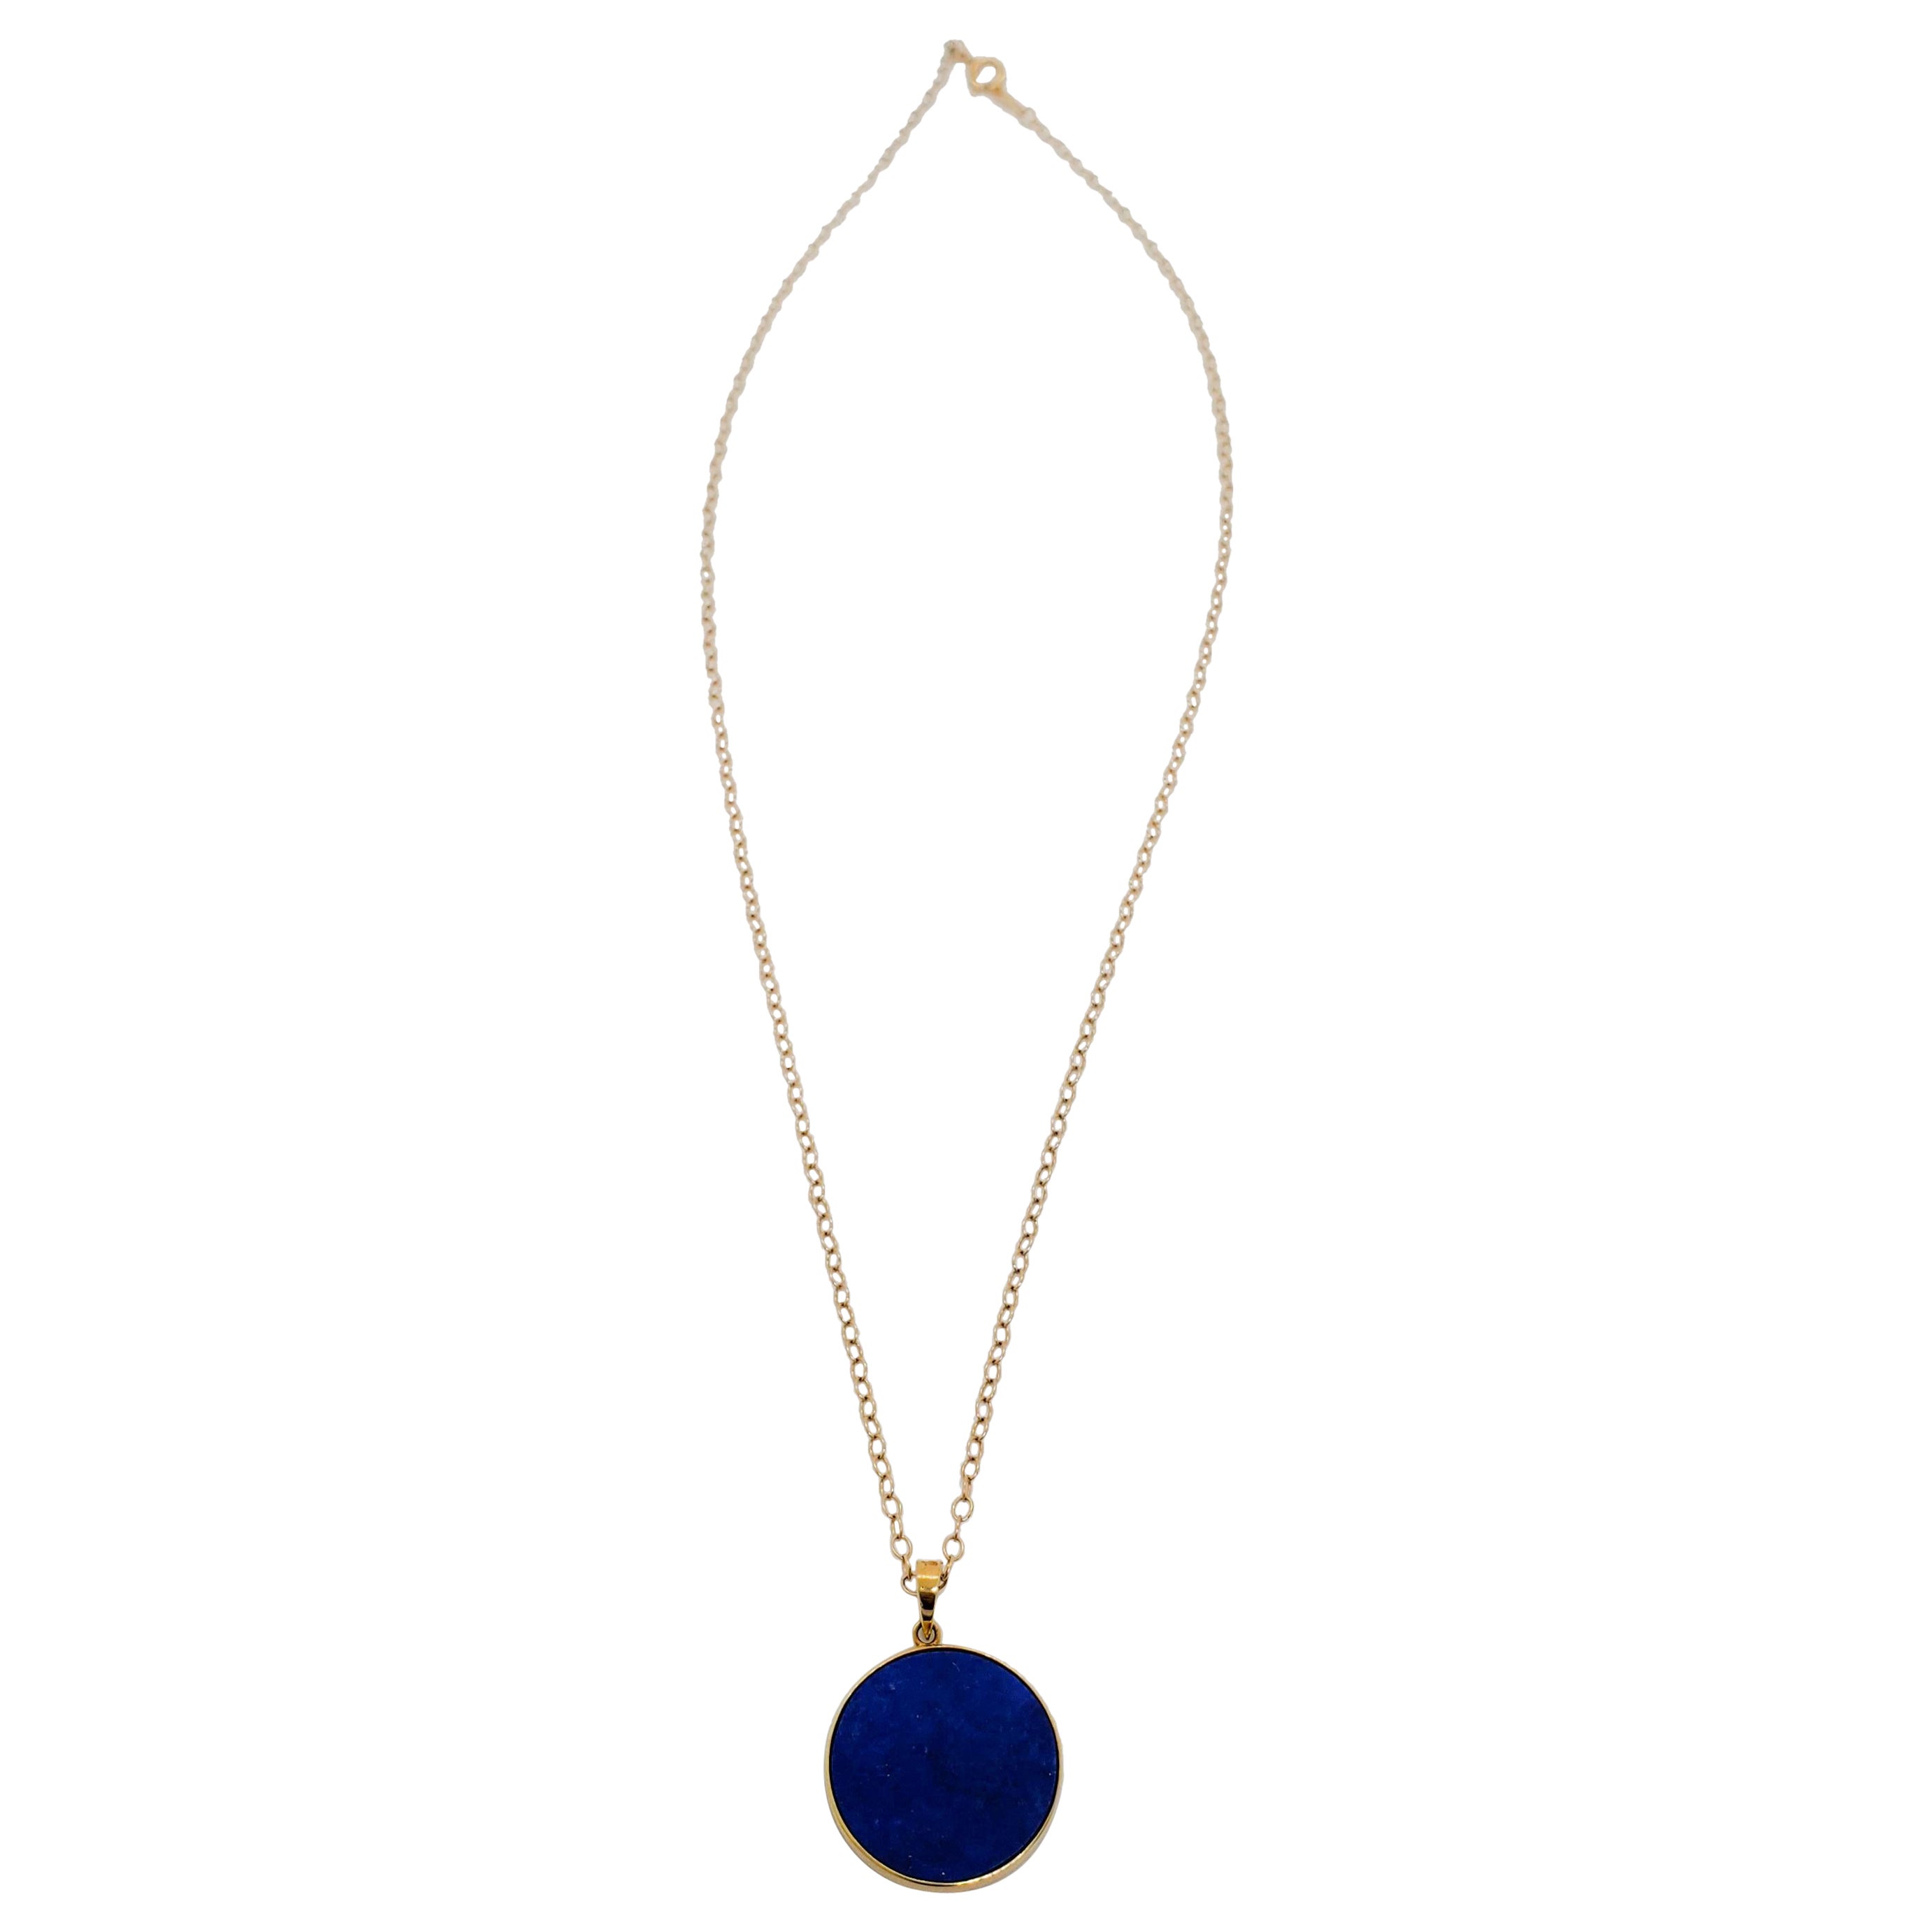  Lapis Lazuli Necklace in 14k Yellow Gold For Sale